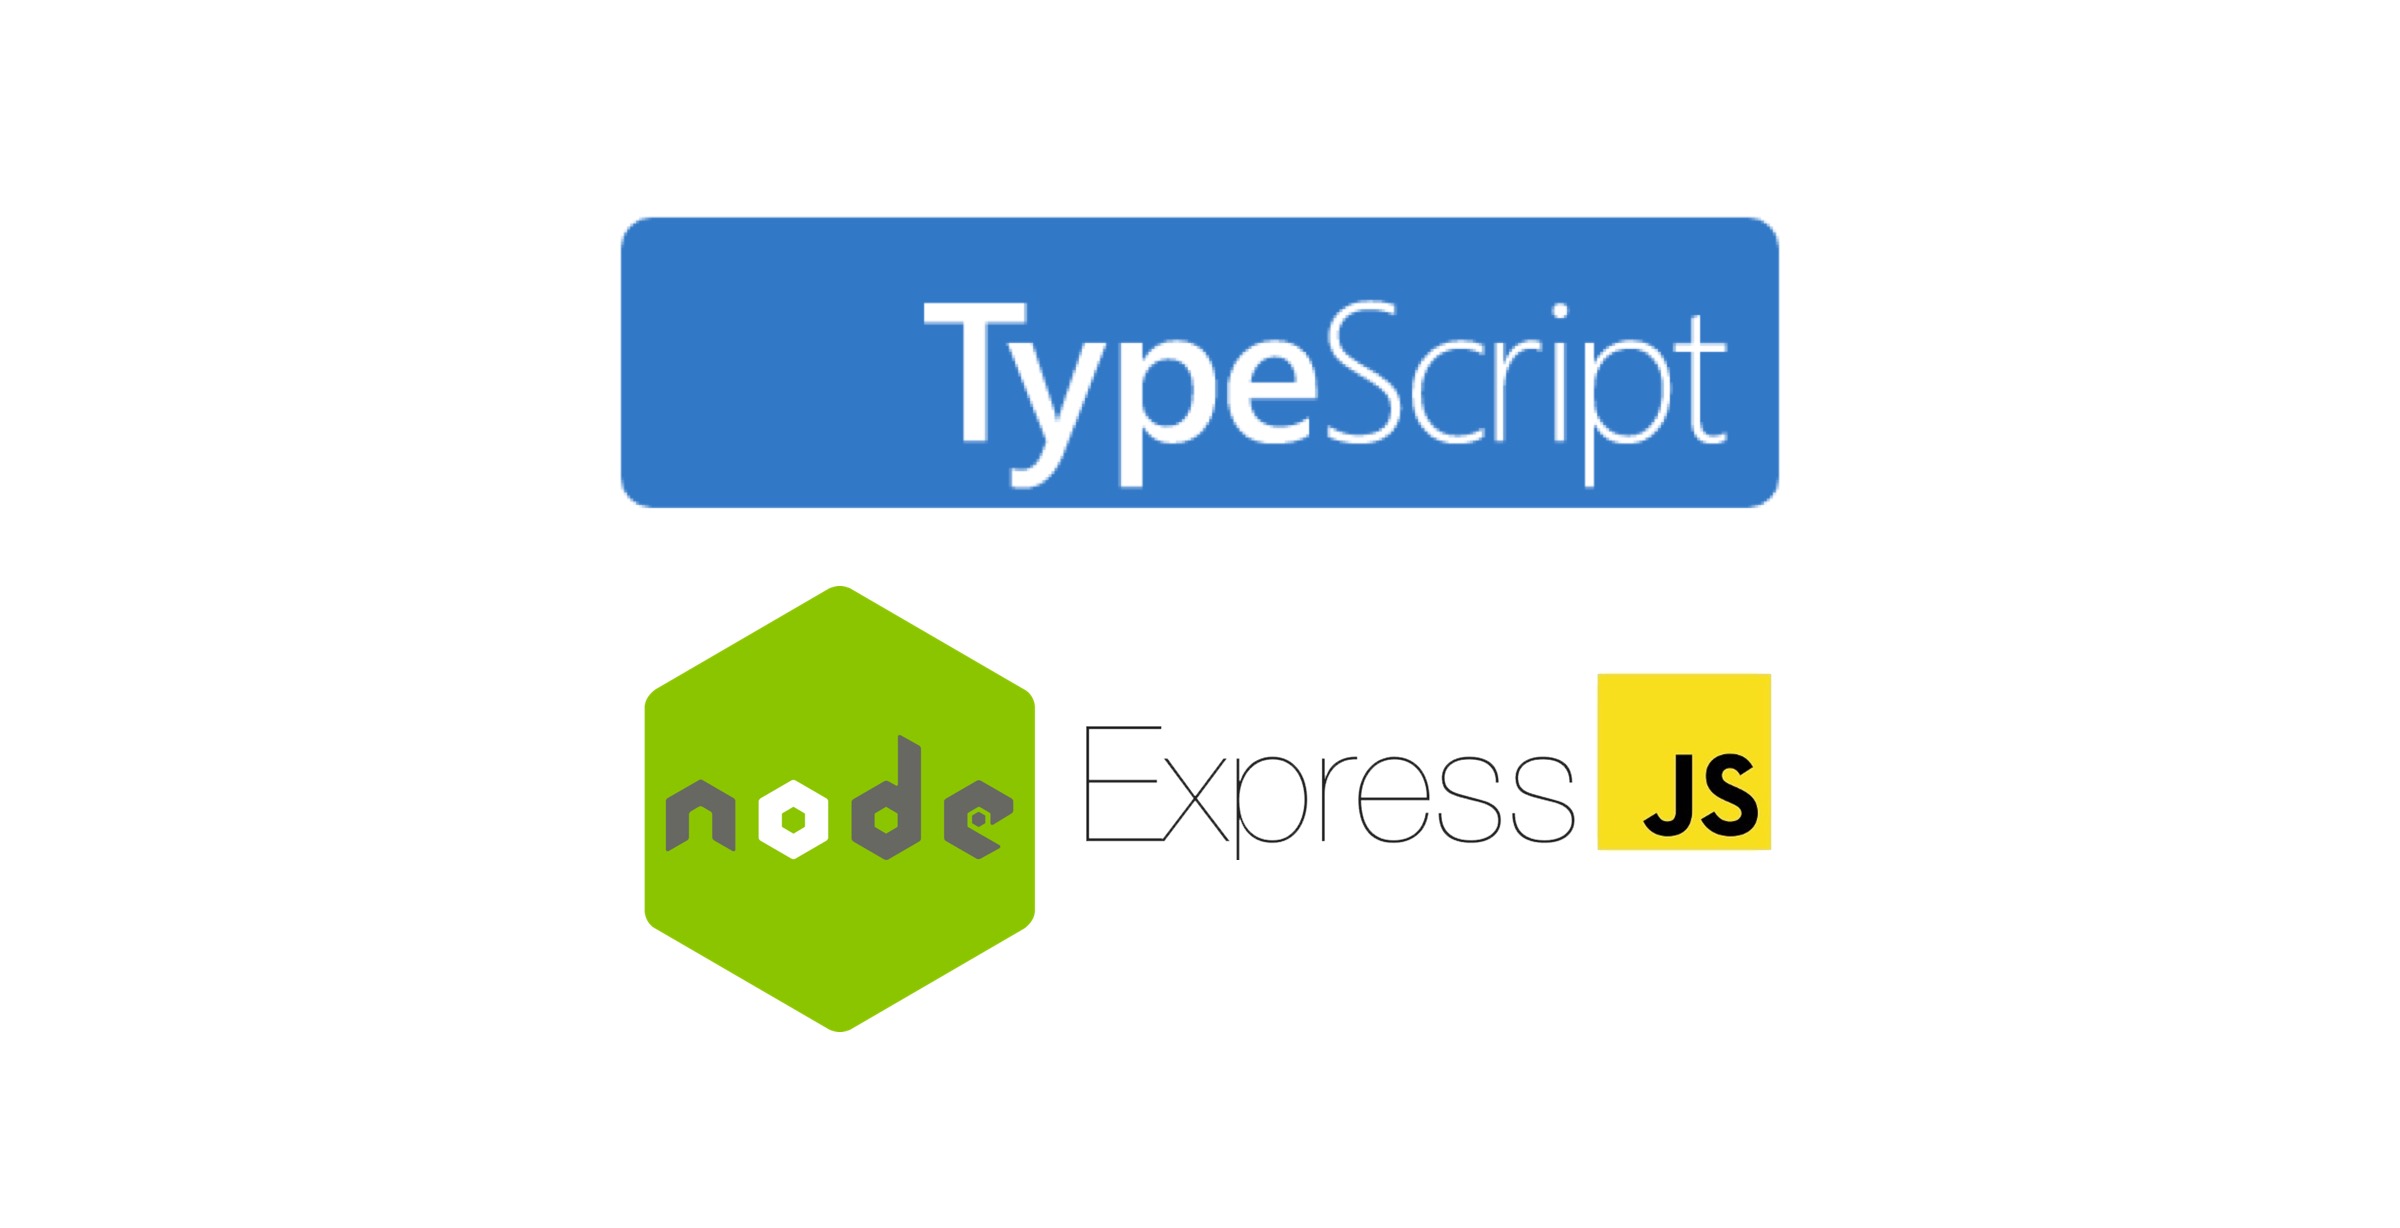 images/how-to-use-typescript-with-nodejs-and-express.jpg